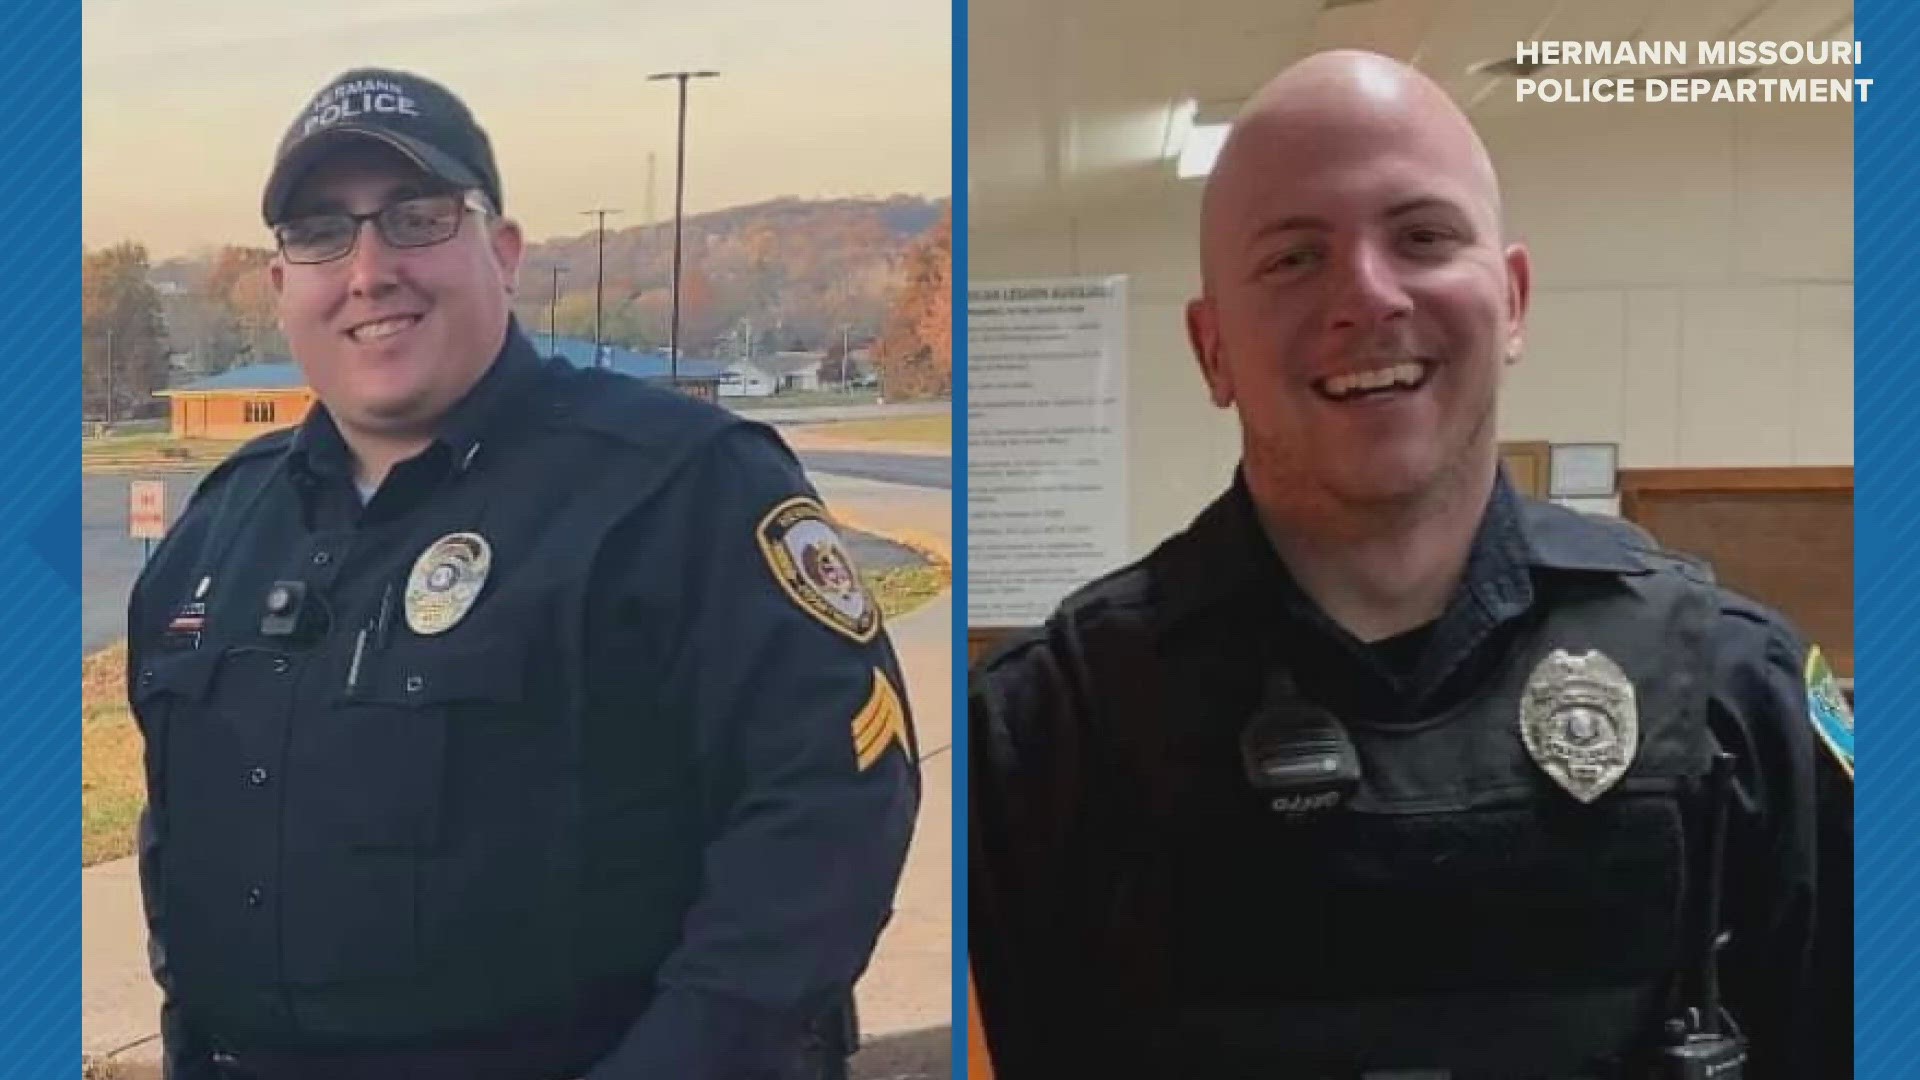 Hermann will honor Detective Sgt. Mason Griffith and Officer Adam Sullentrup with a vigil Friday night at Hermann High School. Doors open at 5:30 p.m.